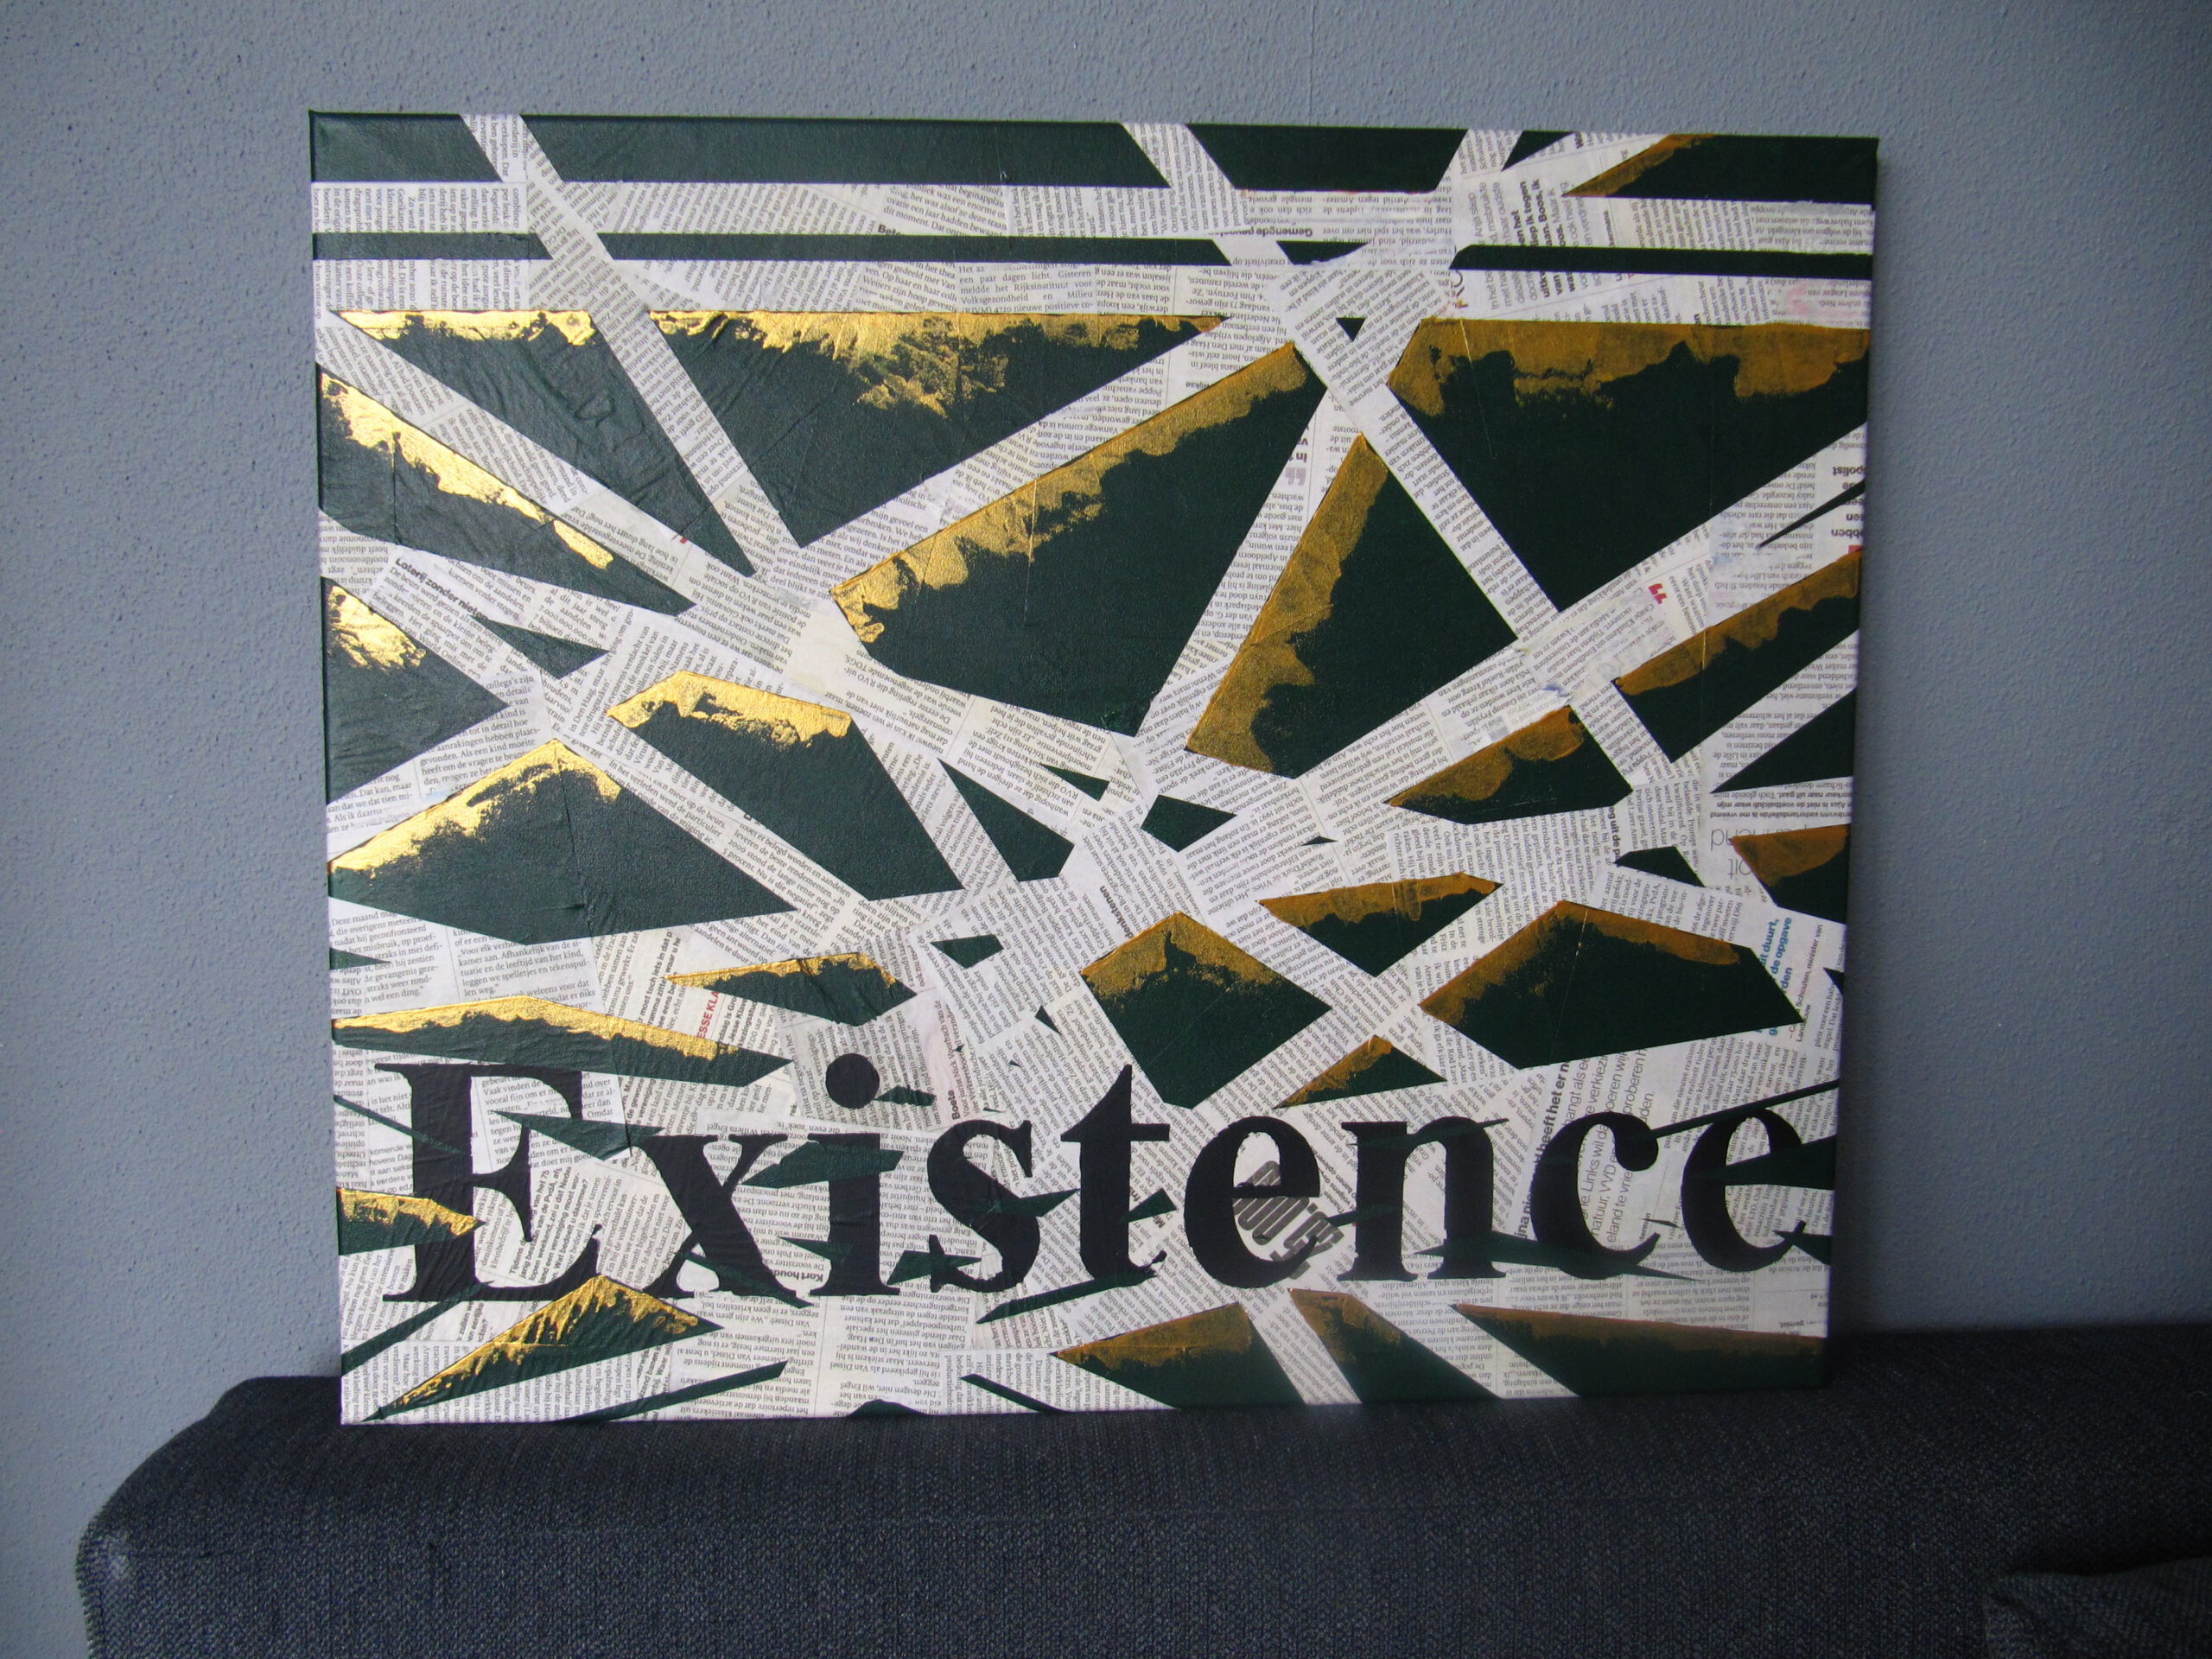 Existence 1